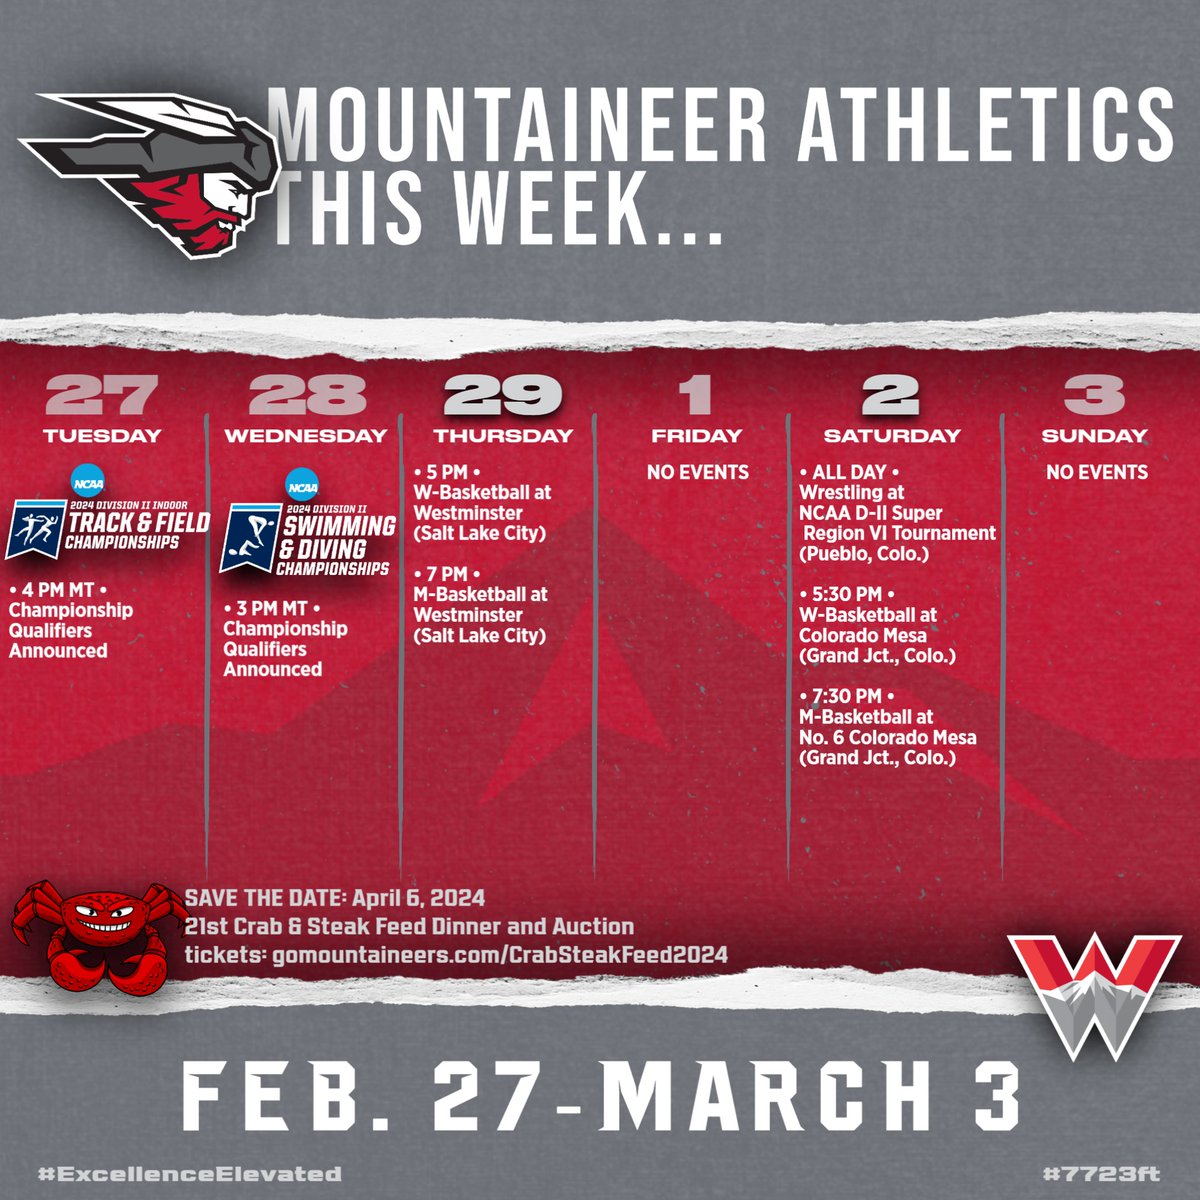 Basketball finishes regular season on the road, wrestling battles for nat'l invites at the Super Region Tournament, and both indoor T&F and women's swimming learn of nat'l qualifiers! #ExcellenceElevated #7723ft @NCAADII